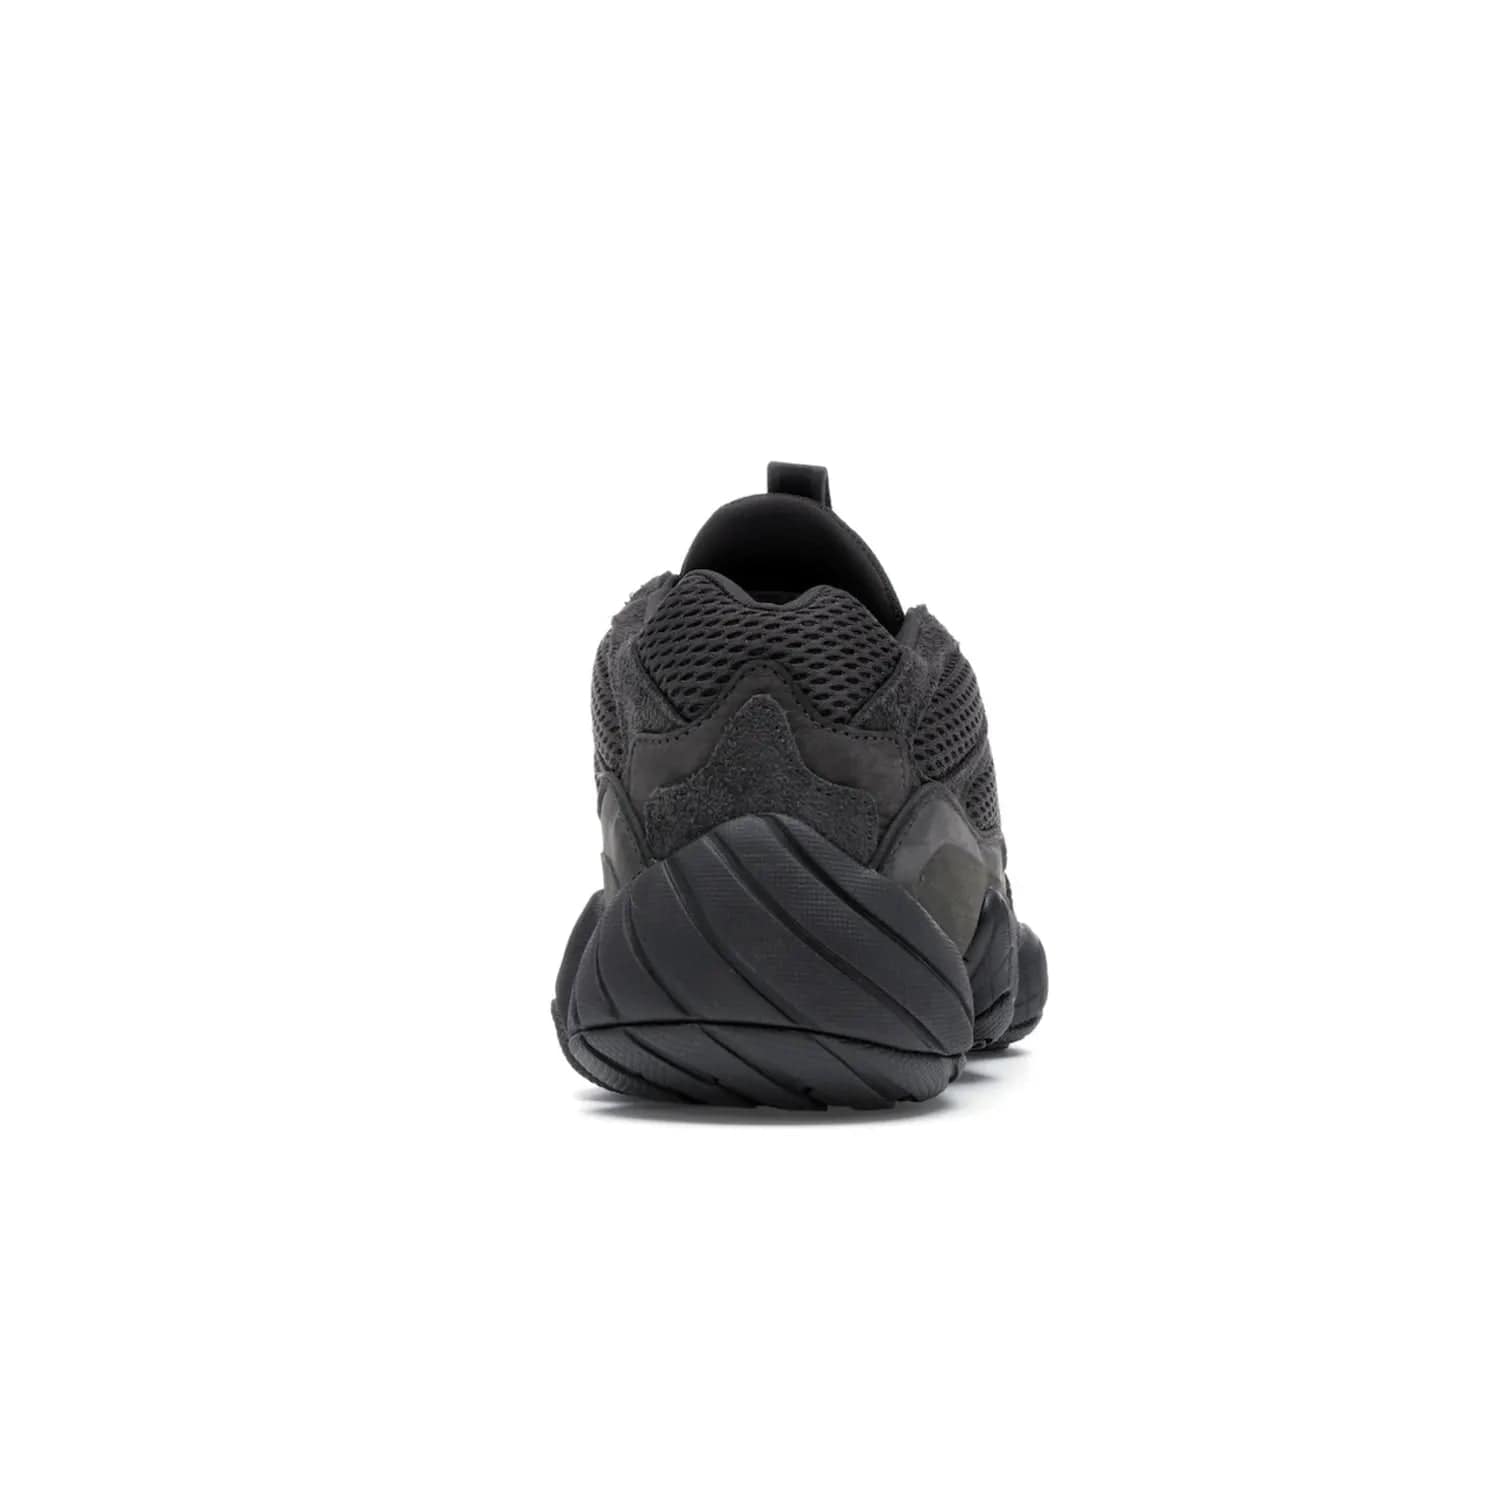 adidas Yeezy 500 Utility Black - Image 29 - Only at www.BallersClubKickz.com - Iconic adidas Yeezy 500 Utility Black in All-Black colorway. Durable black mesh and suede upper with adiPRENE® sole delivers comfort and support. Be unstoppable with the Yeezy 500 Utility Black. Released July 2018.